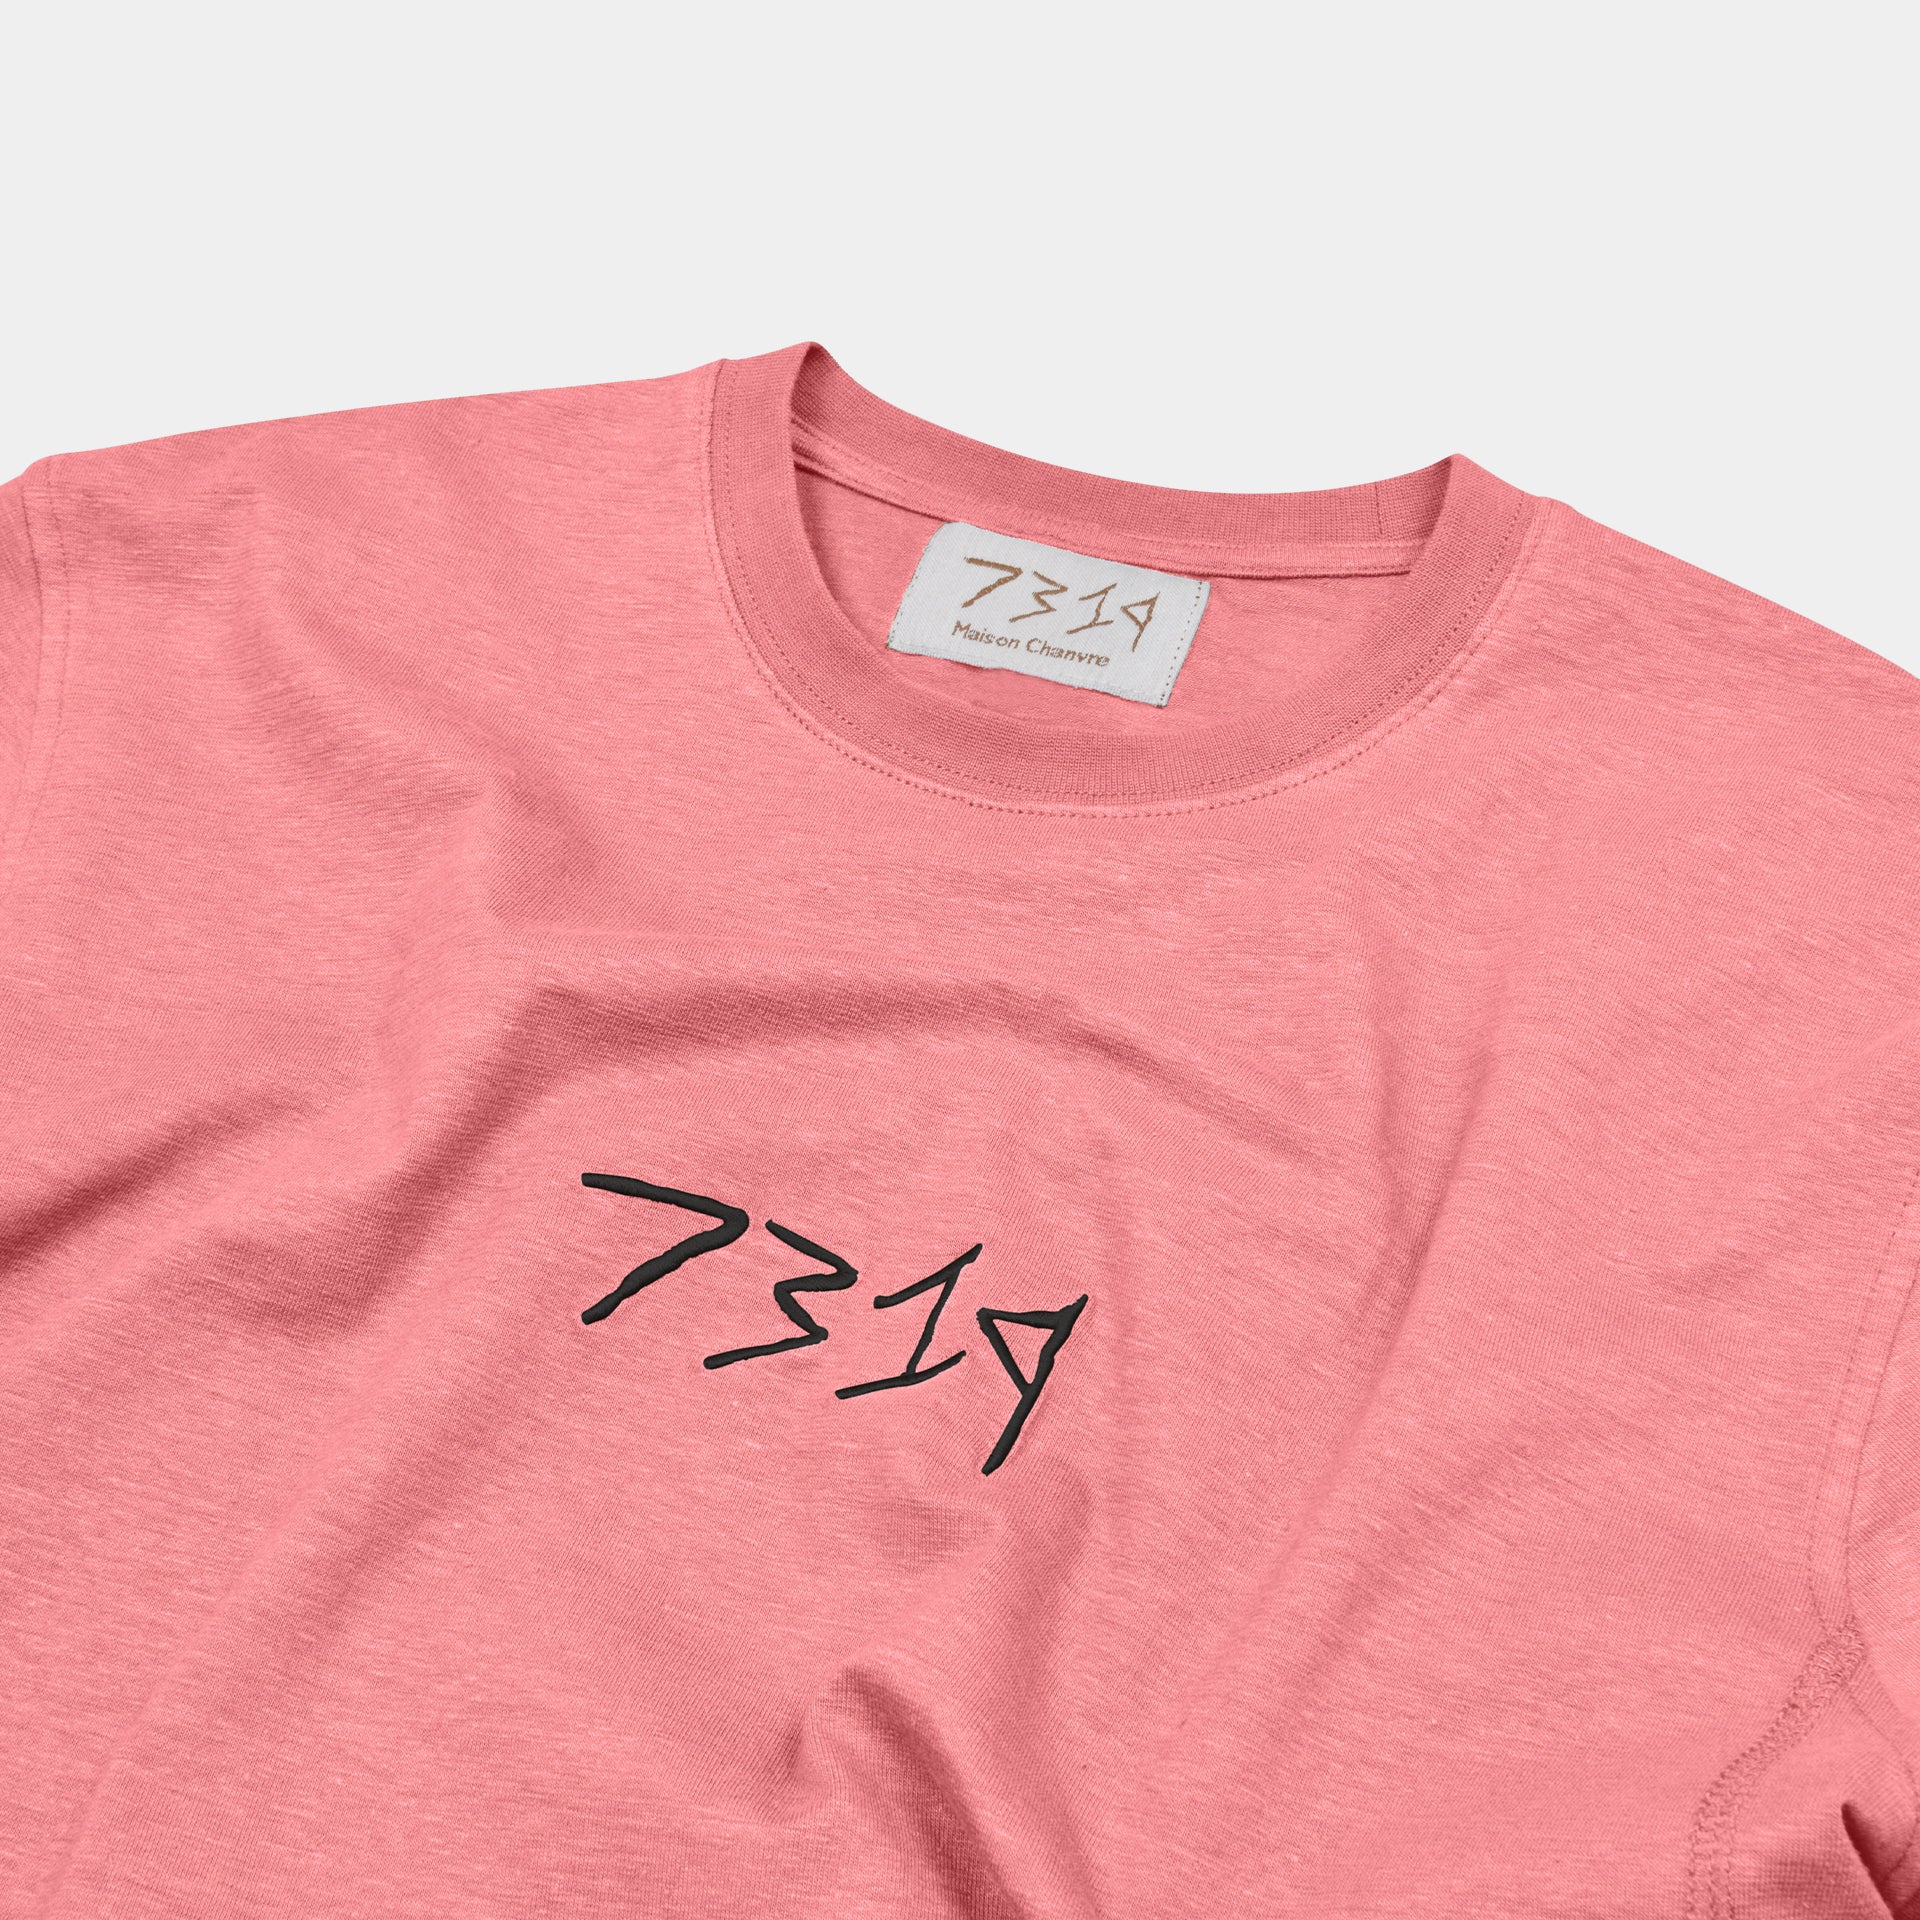  Pink 7319 t-shirt front shot with label, flipped